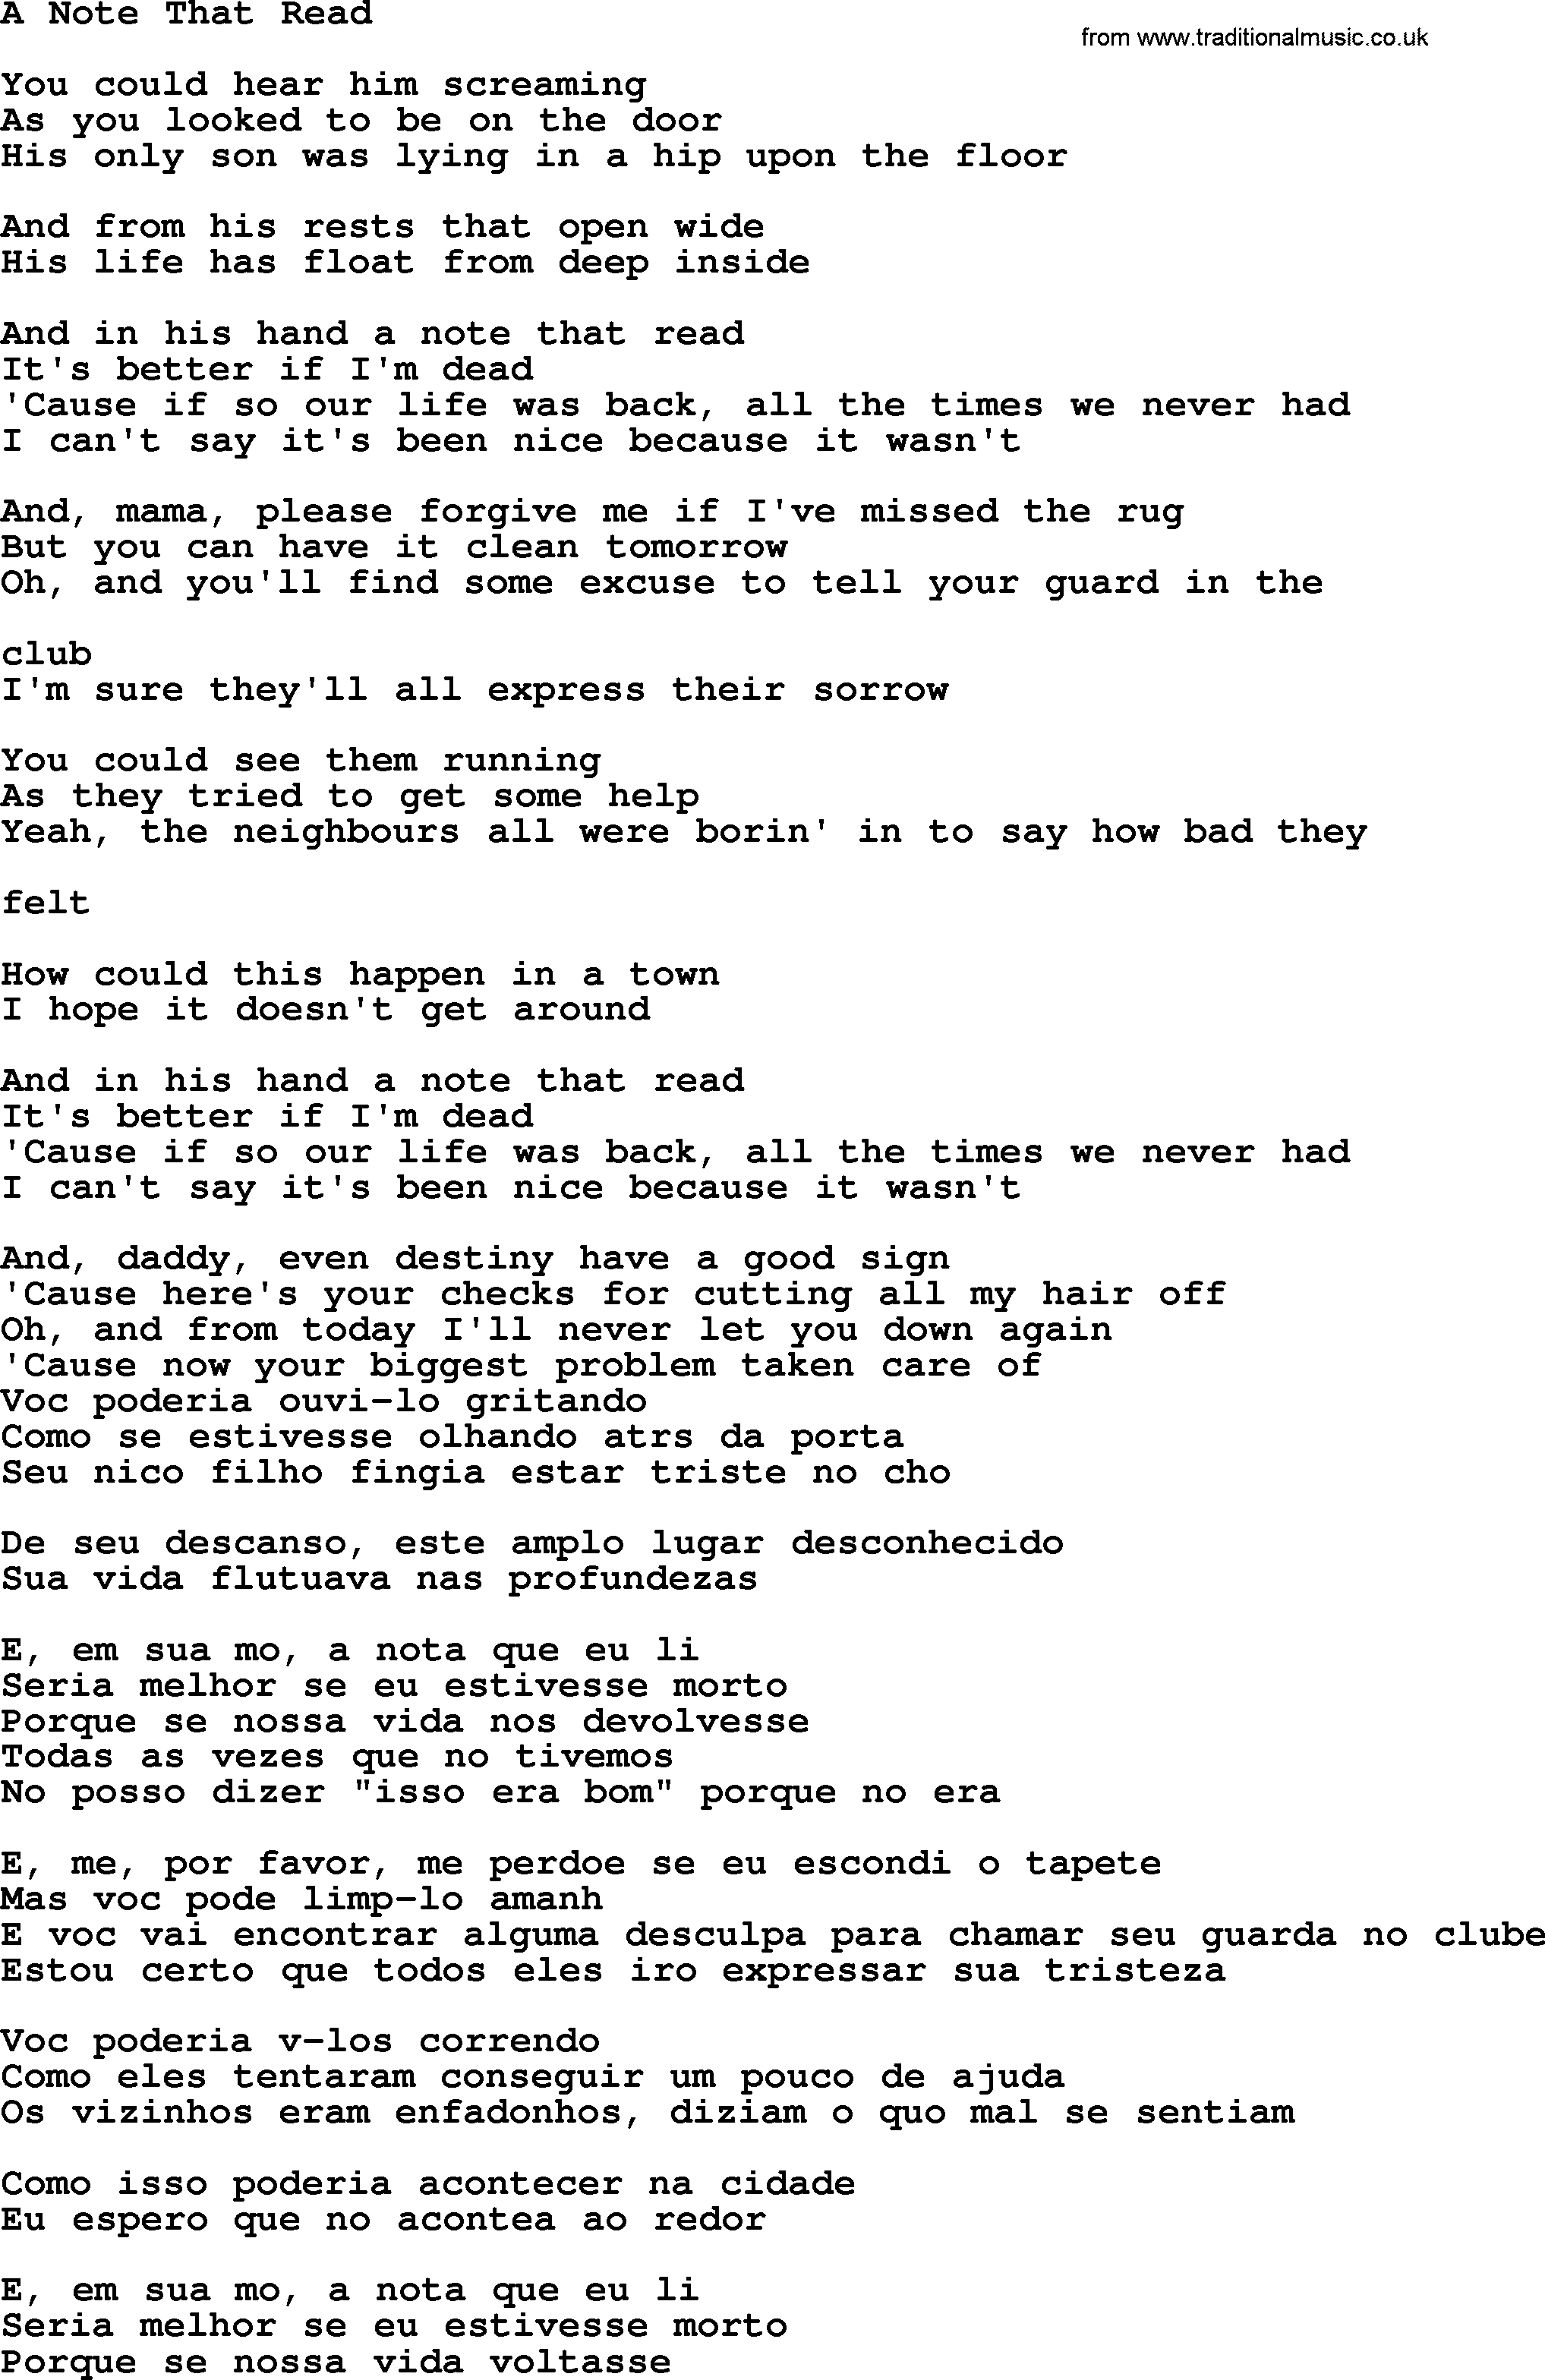 The Byrds song A Note That Read, lyrics